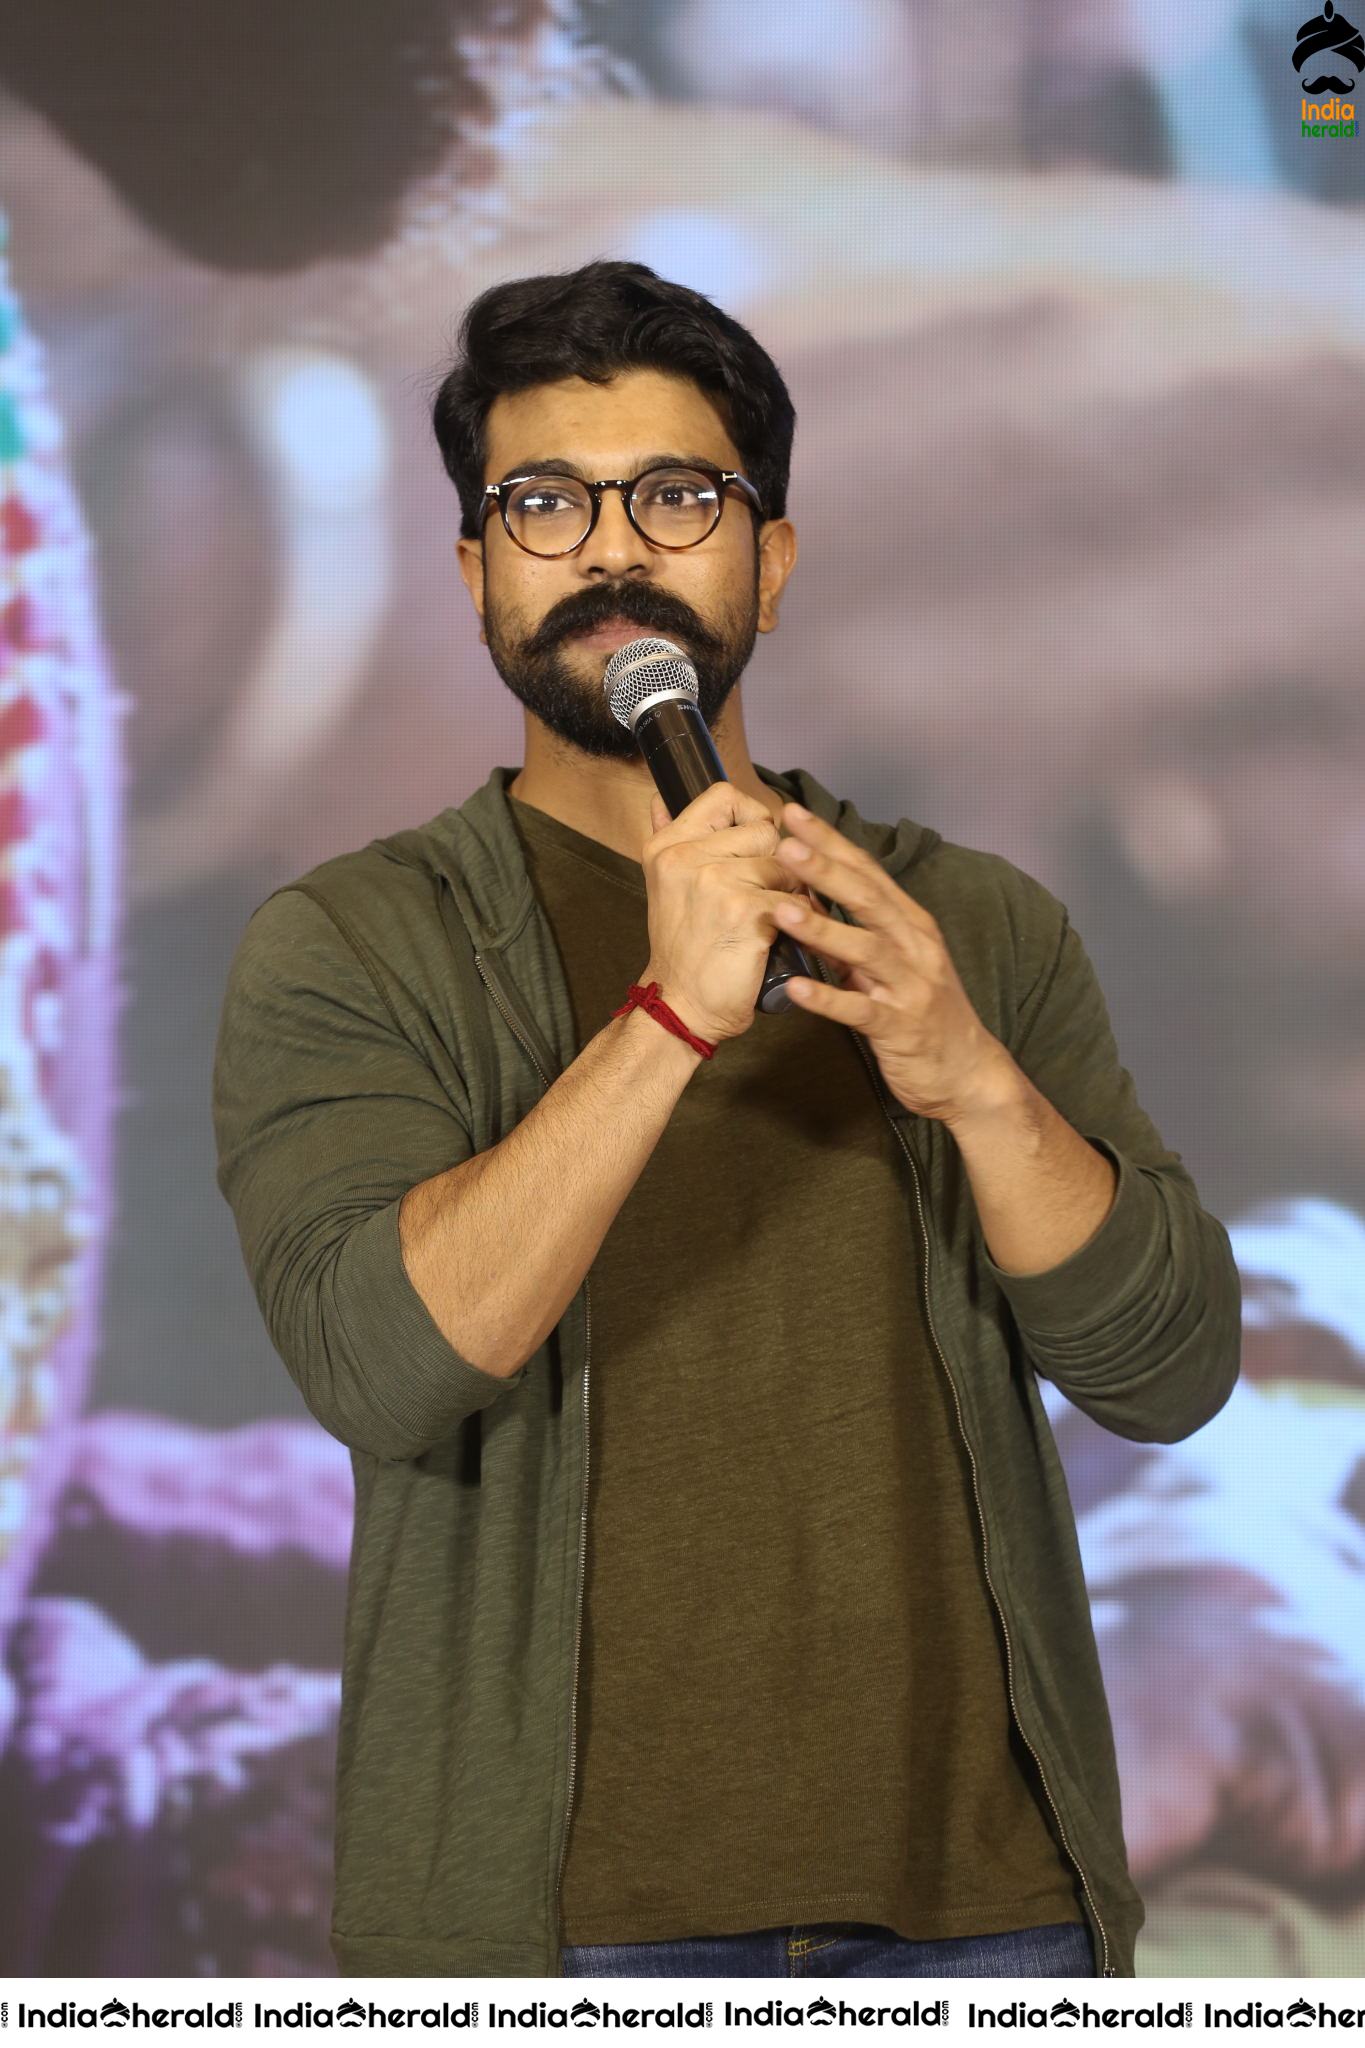 Actor Ram Charan Throwback Photos with Twirled Moustache